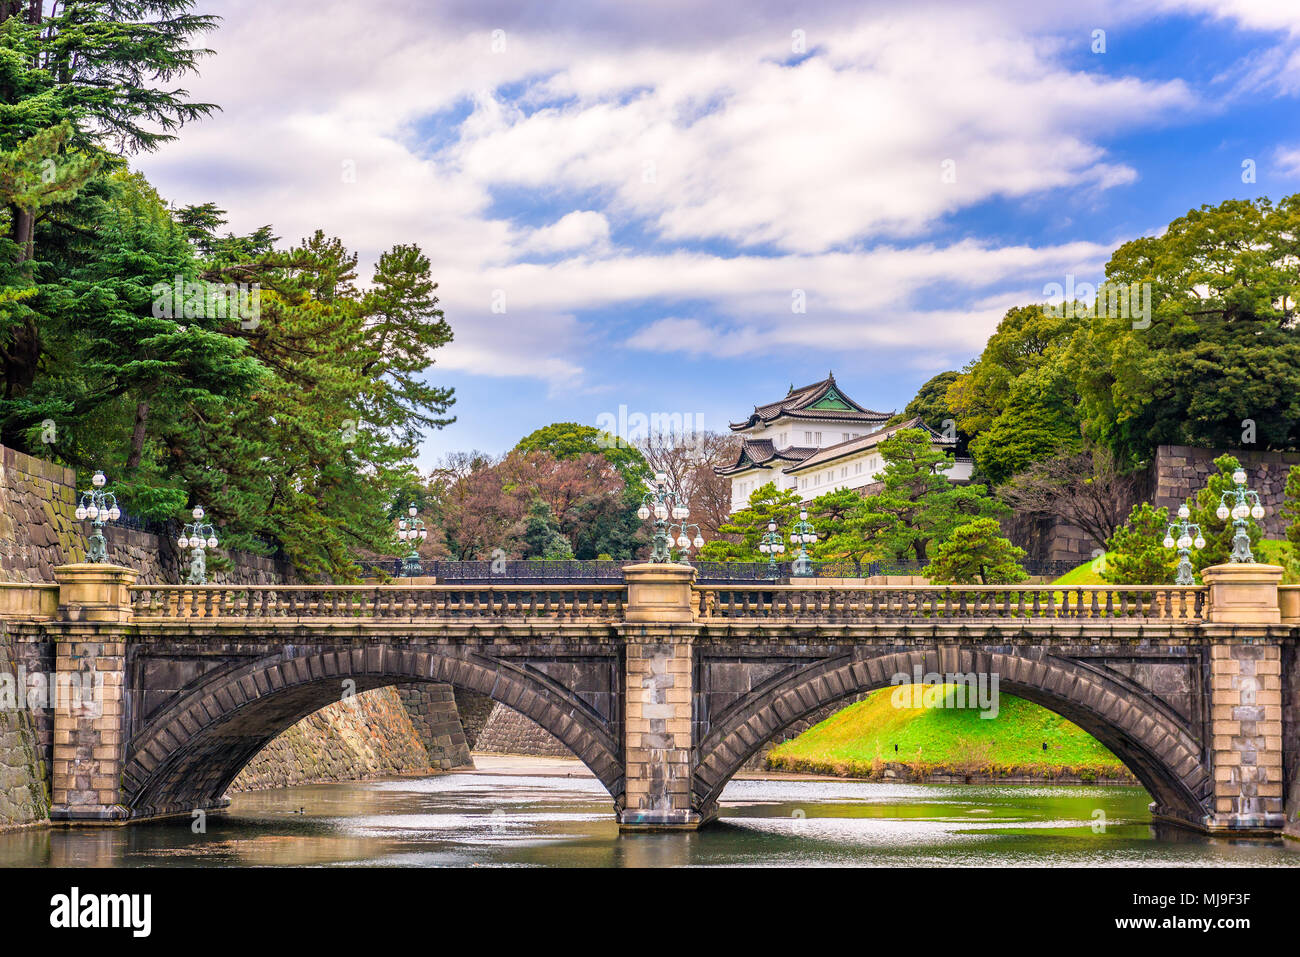 Tokyo, Japan at the Imperial Palace moat and bridge. Stock Photo